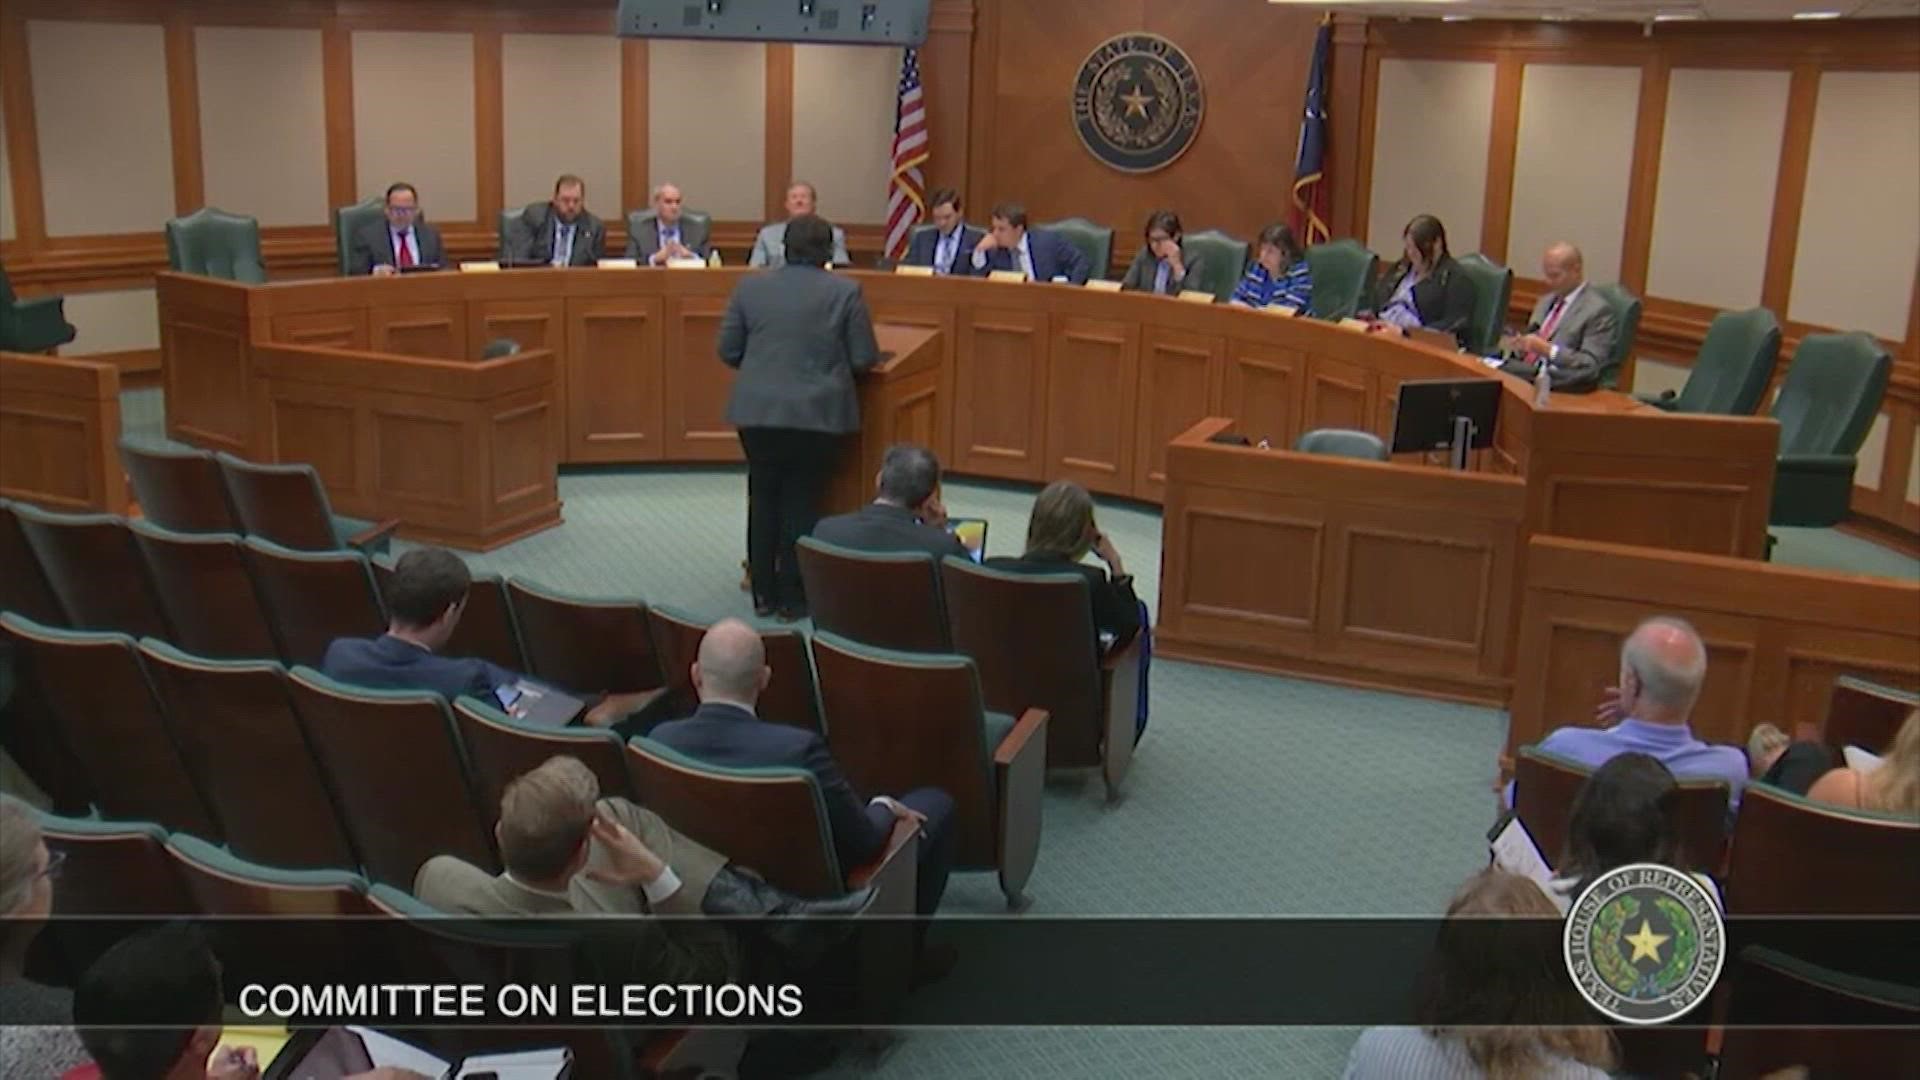 Harris County Elections Administrator Isabel Longoria spoke to the House Committee on Elections Wednesday about the legislature's new rules on paper ballots.